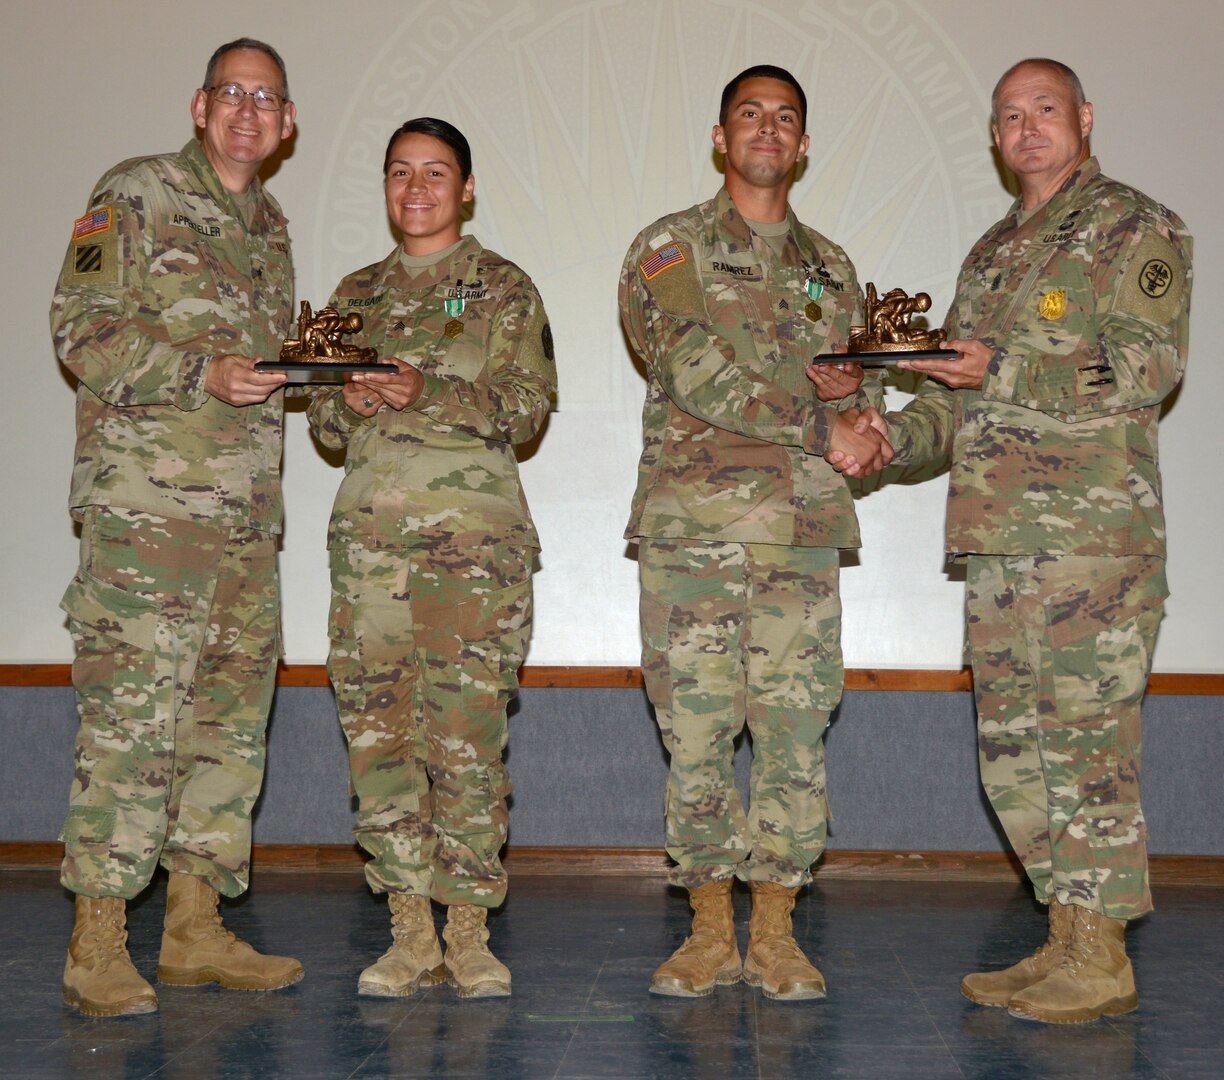 Brig. Gen. Ned Appenzeller (left) and Command Sgt. Maj. Joseph Cecil (right) hand trophies to Sgt. Samantha Delgado (center left) and Sgt. Kevin Ramirez (center right) at the Regional Health Command-Central Best Medic ceremony at Joint Base San Antonio-Camp Bullis. Delgado and Ramirez will represent Brooke Army Medical Center and Regional Health Command-Central at the Army Medicine Best Medic Competition in the fall.